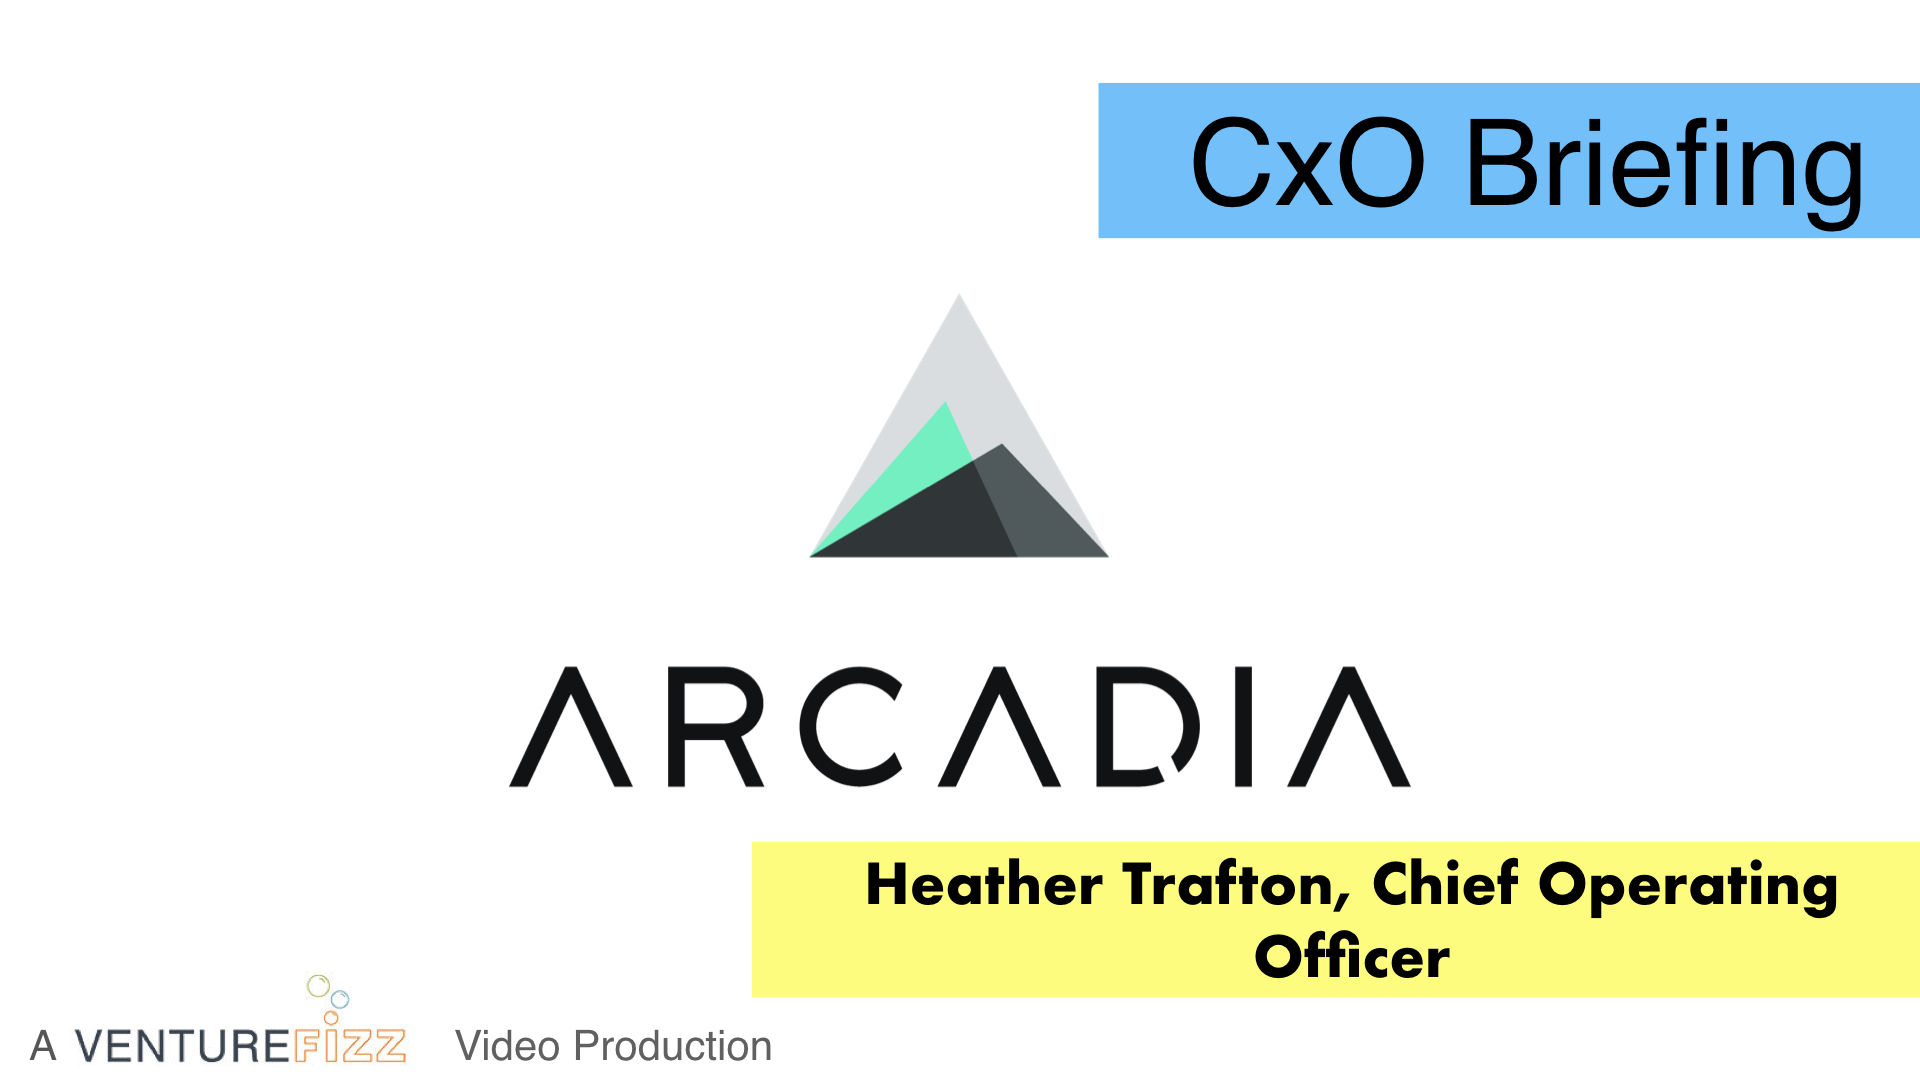 CxO Briefing: Arcadia Chief Operating Officer Heather Trafton banner image